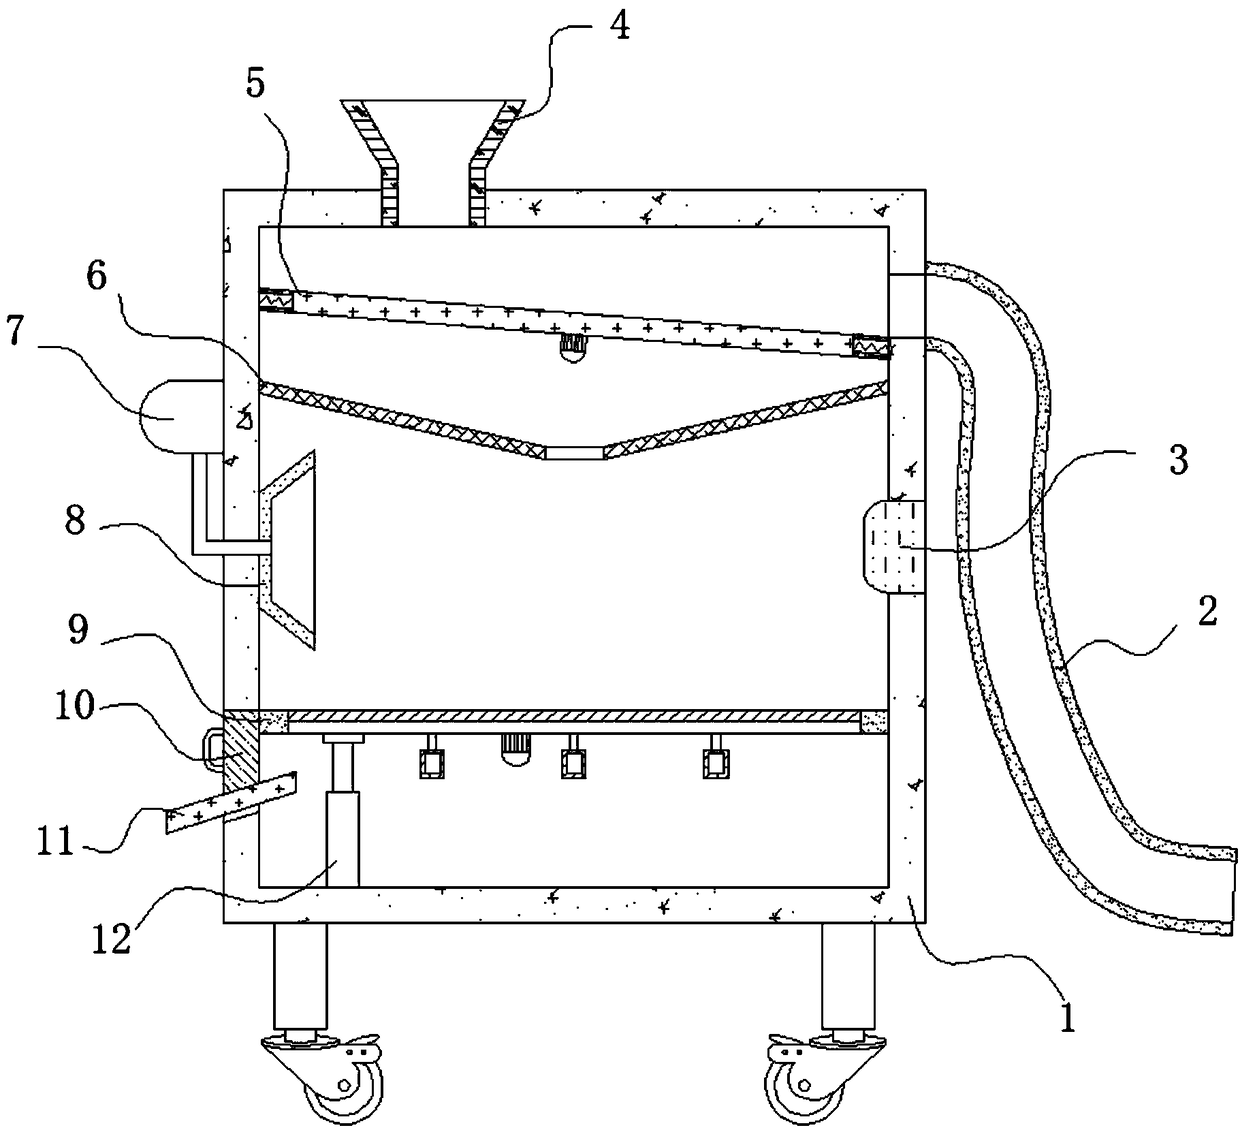 Rice screening device for removing impurities used in agricultural planting